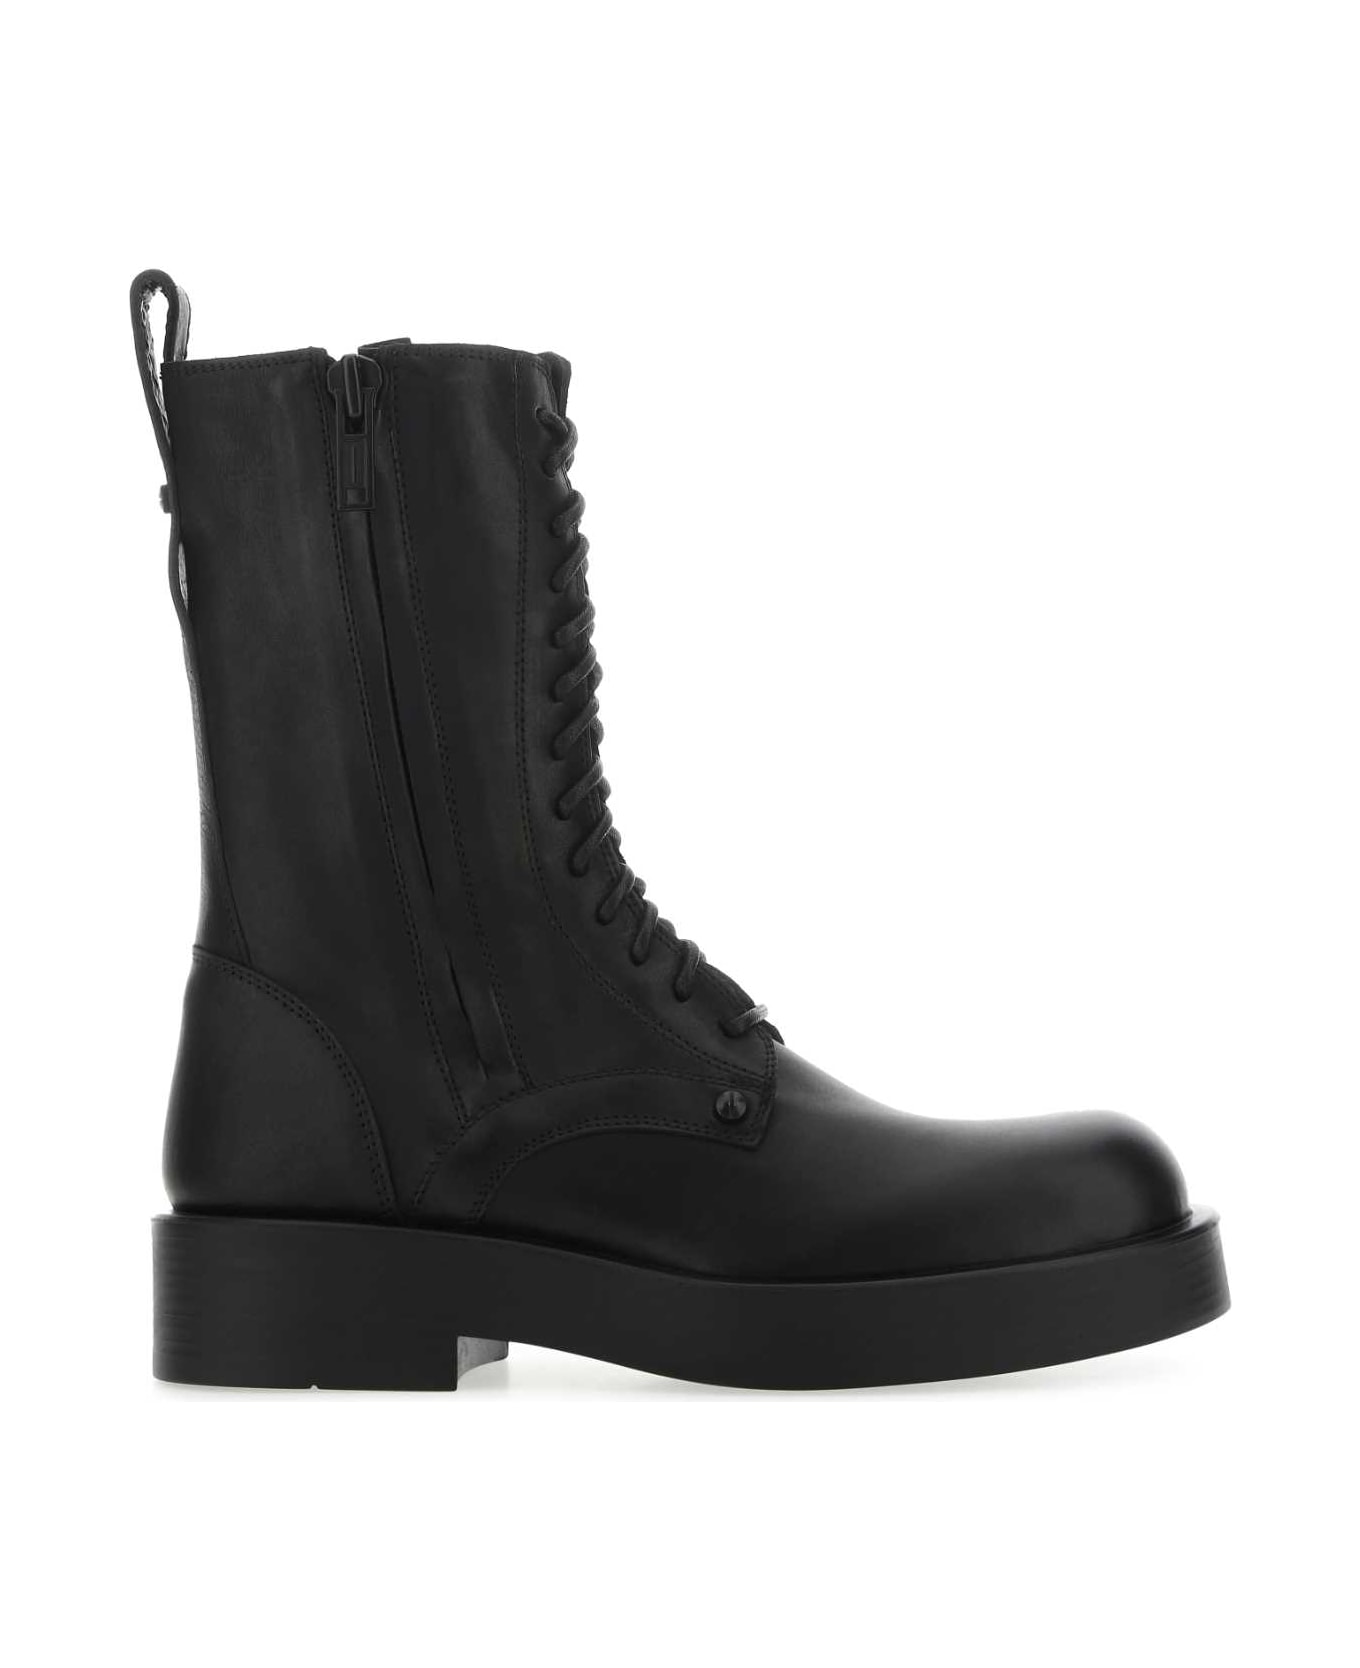 Ann Demeulemeester Black Leather Maxim Ankle Boots - 099 ブーツ